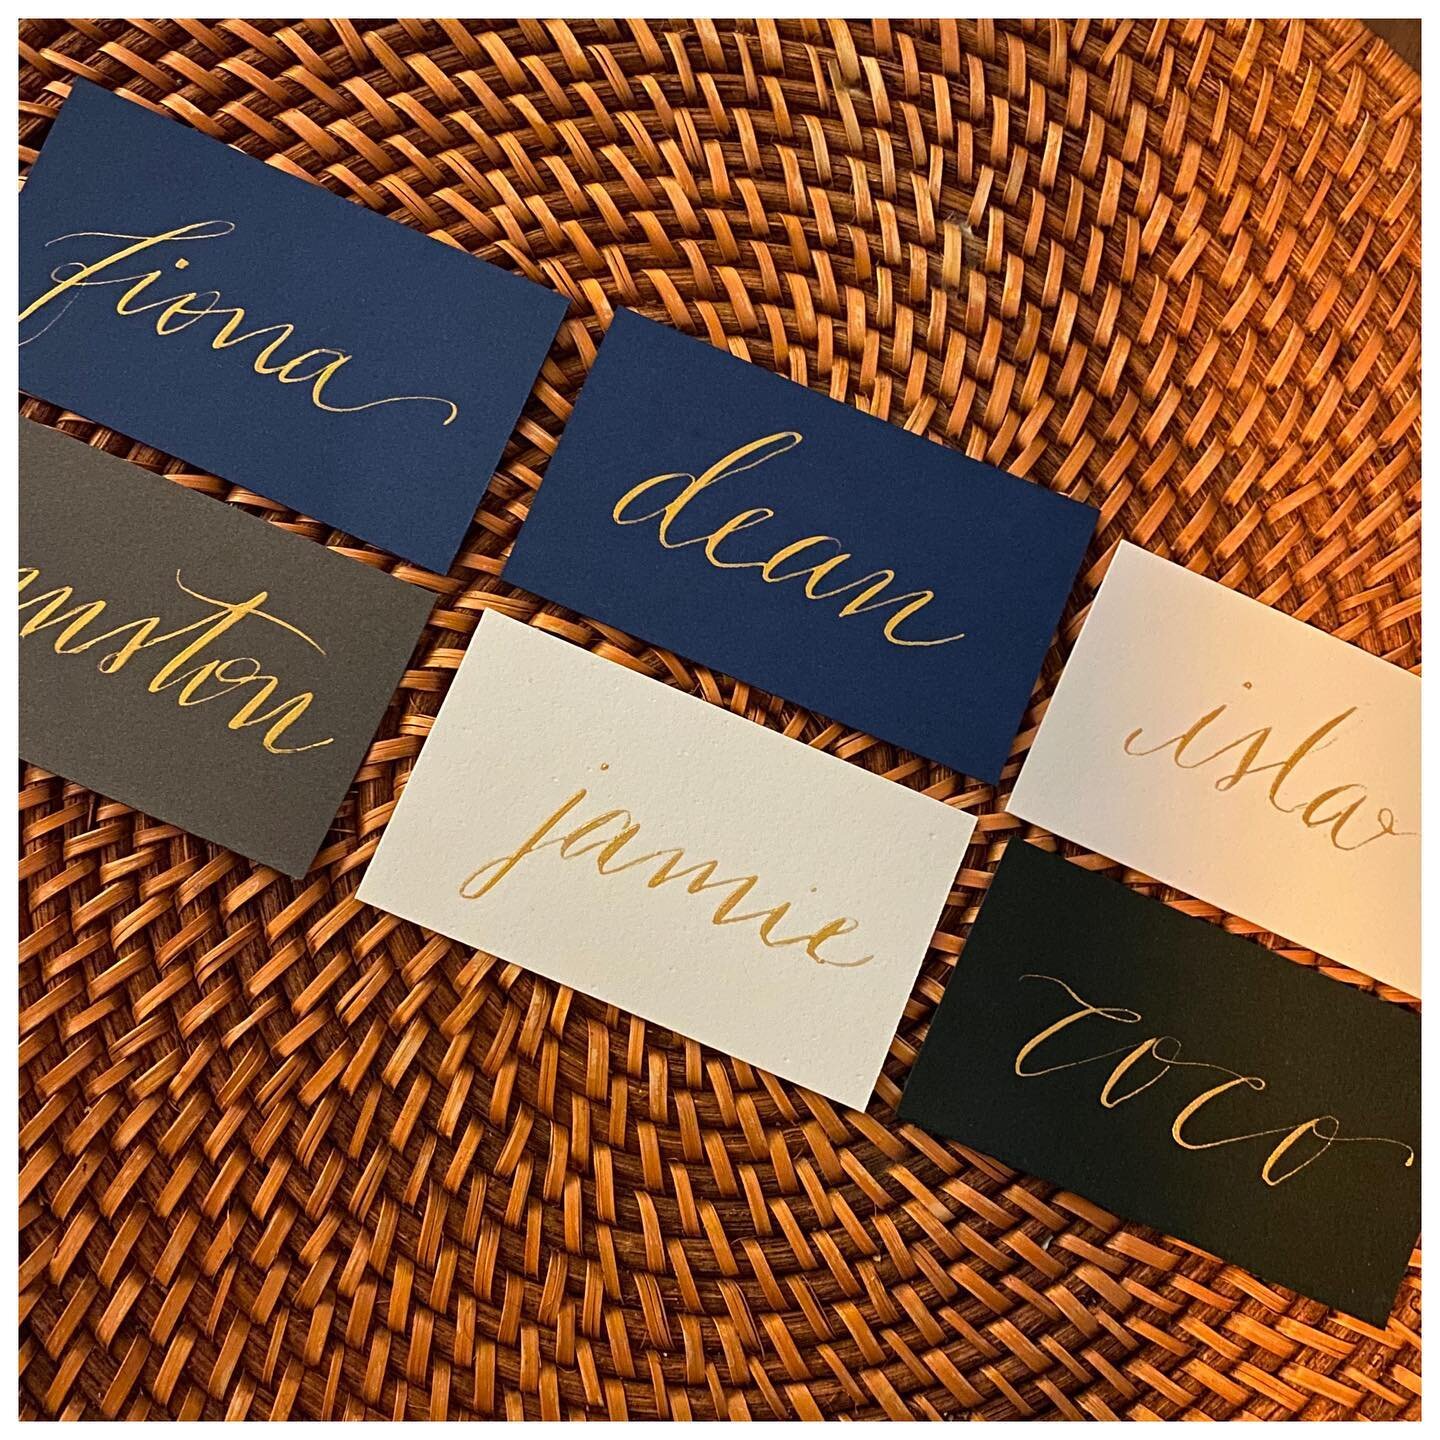 now offering place cards for your socially distant thanksgiving dinners 🦃

$3/flat card or $4/tented card . navy, forest green, slate or white cards with gold, silver or black ink. shipping incl.

dm or email me to order by 11/19 🎯 

all proceeds b